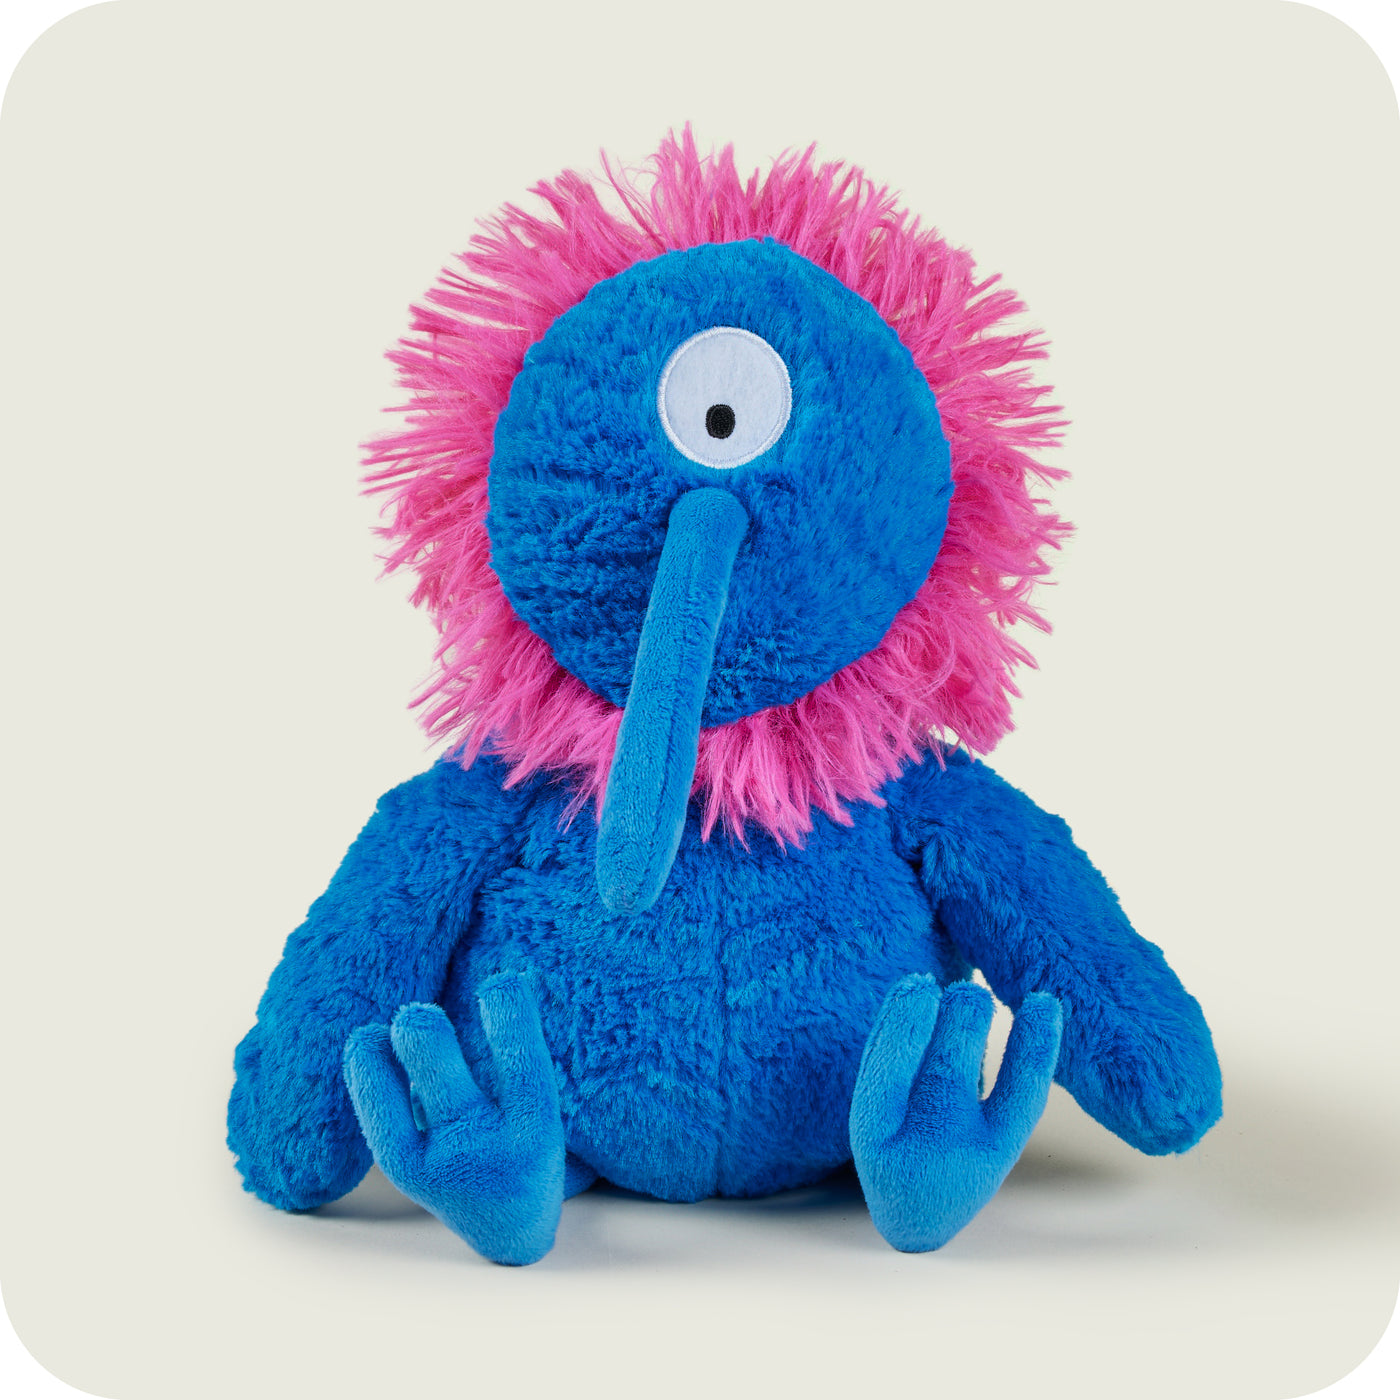 Warmies Bright Blue Monster